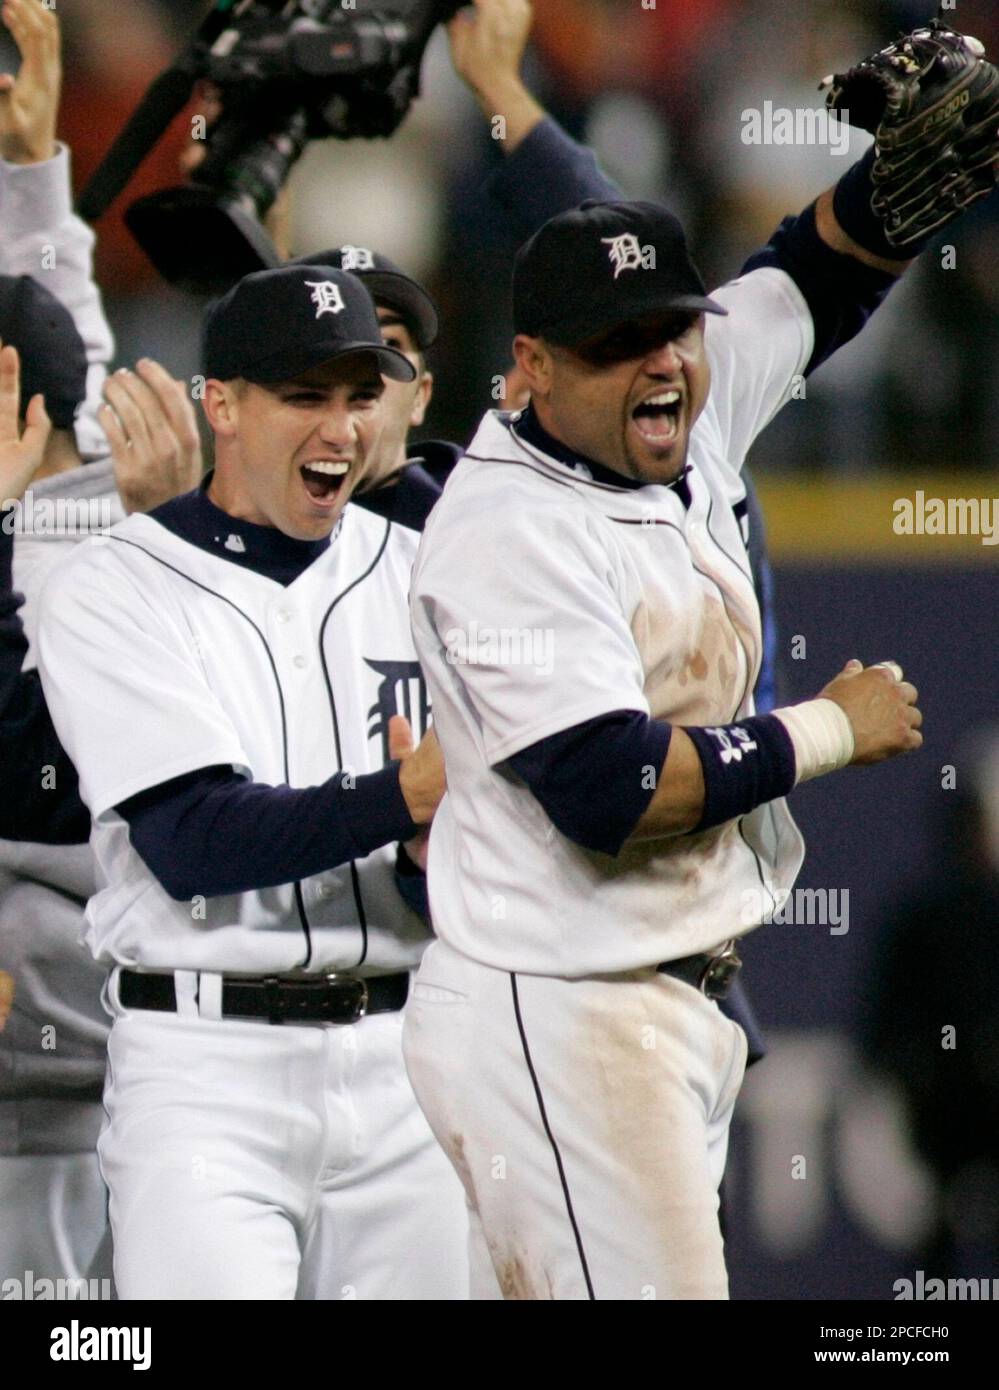 Detroit Tigers' Placido Polanco, right, is congratulated by Miguel Cabrera  after scoring in the third inning of a baseball game against the Kansas  City Royals, Saturday, Aug. 30, 2008, in Detroit. (AP